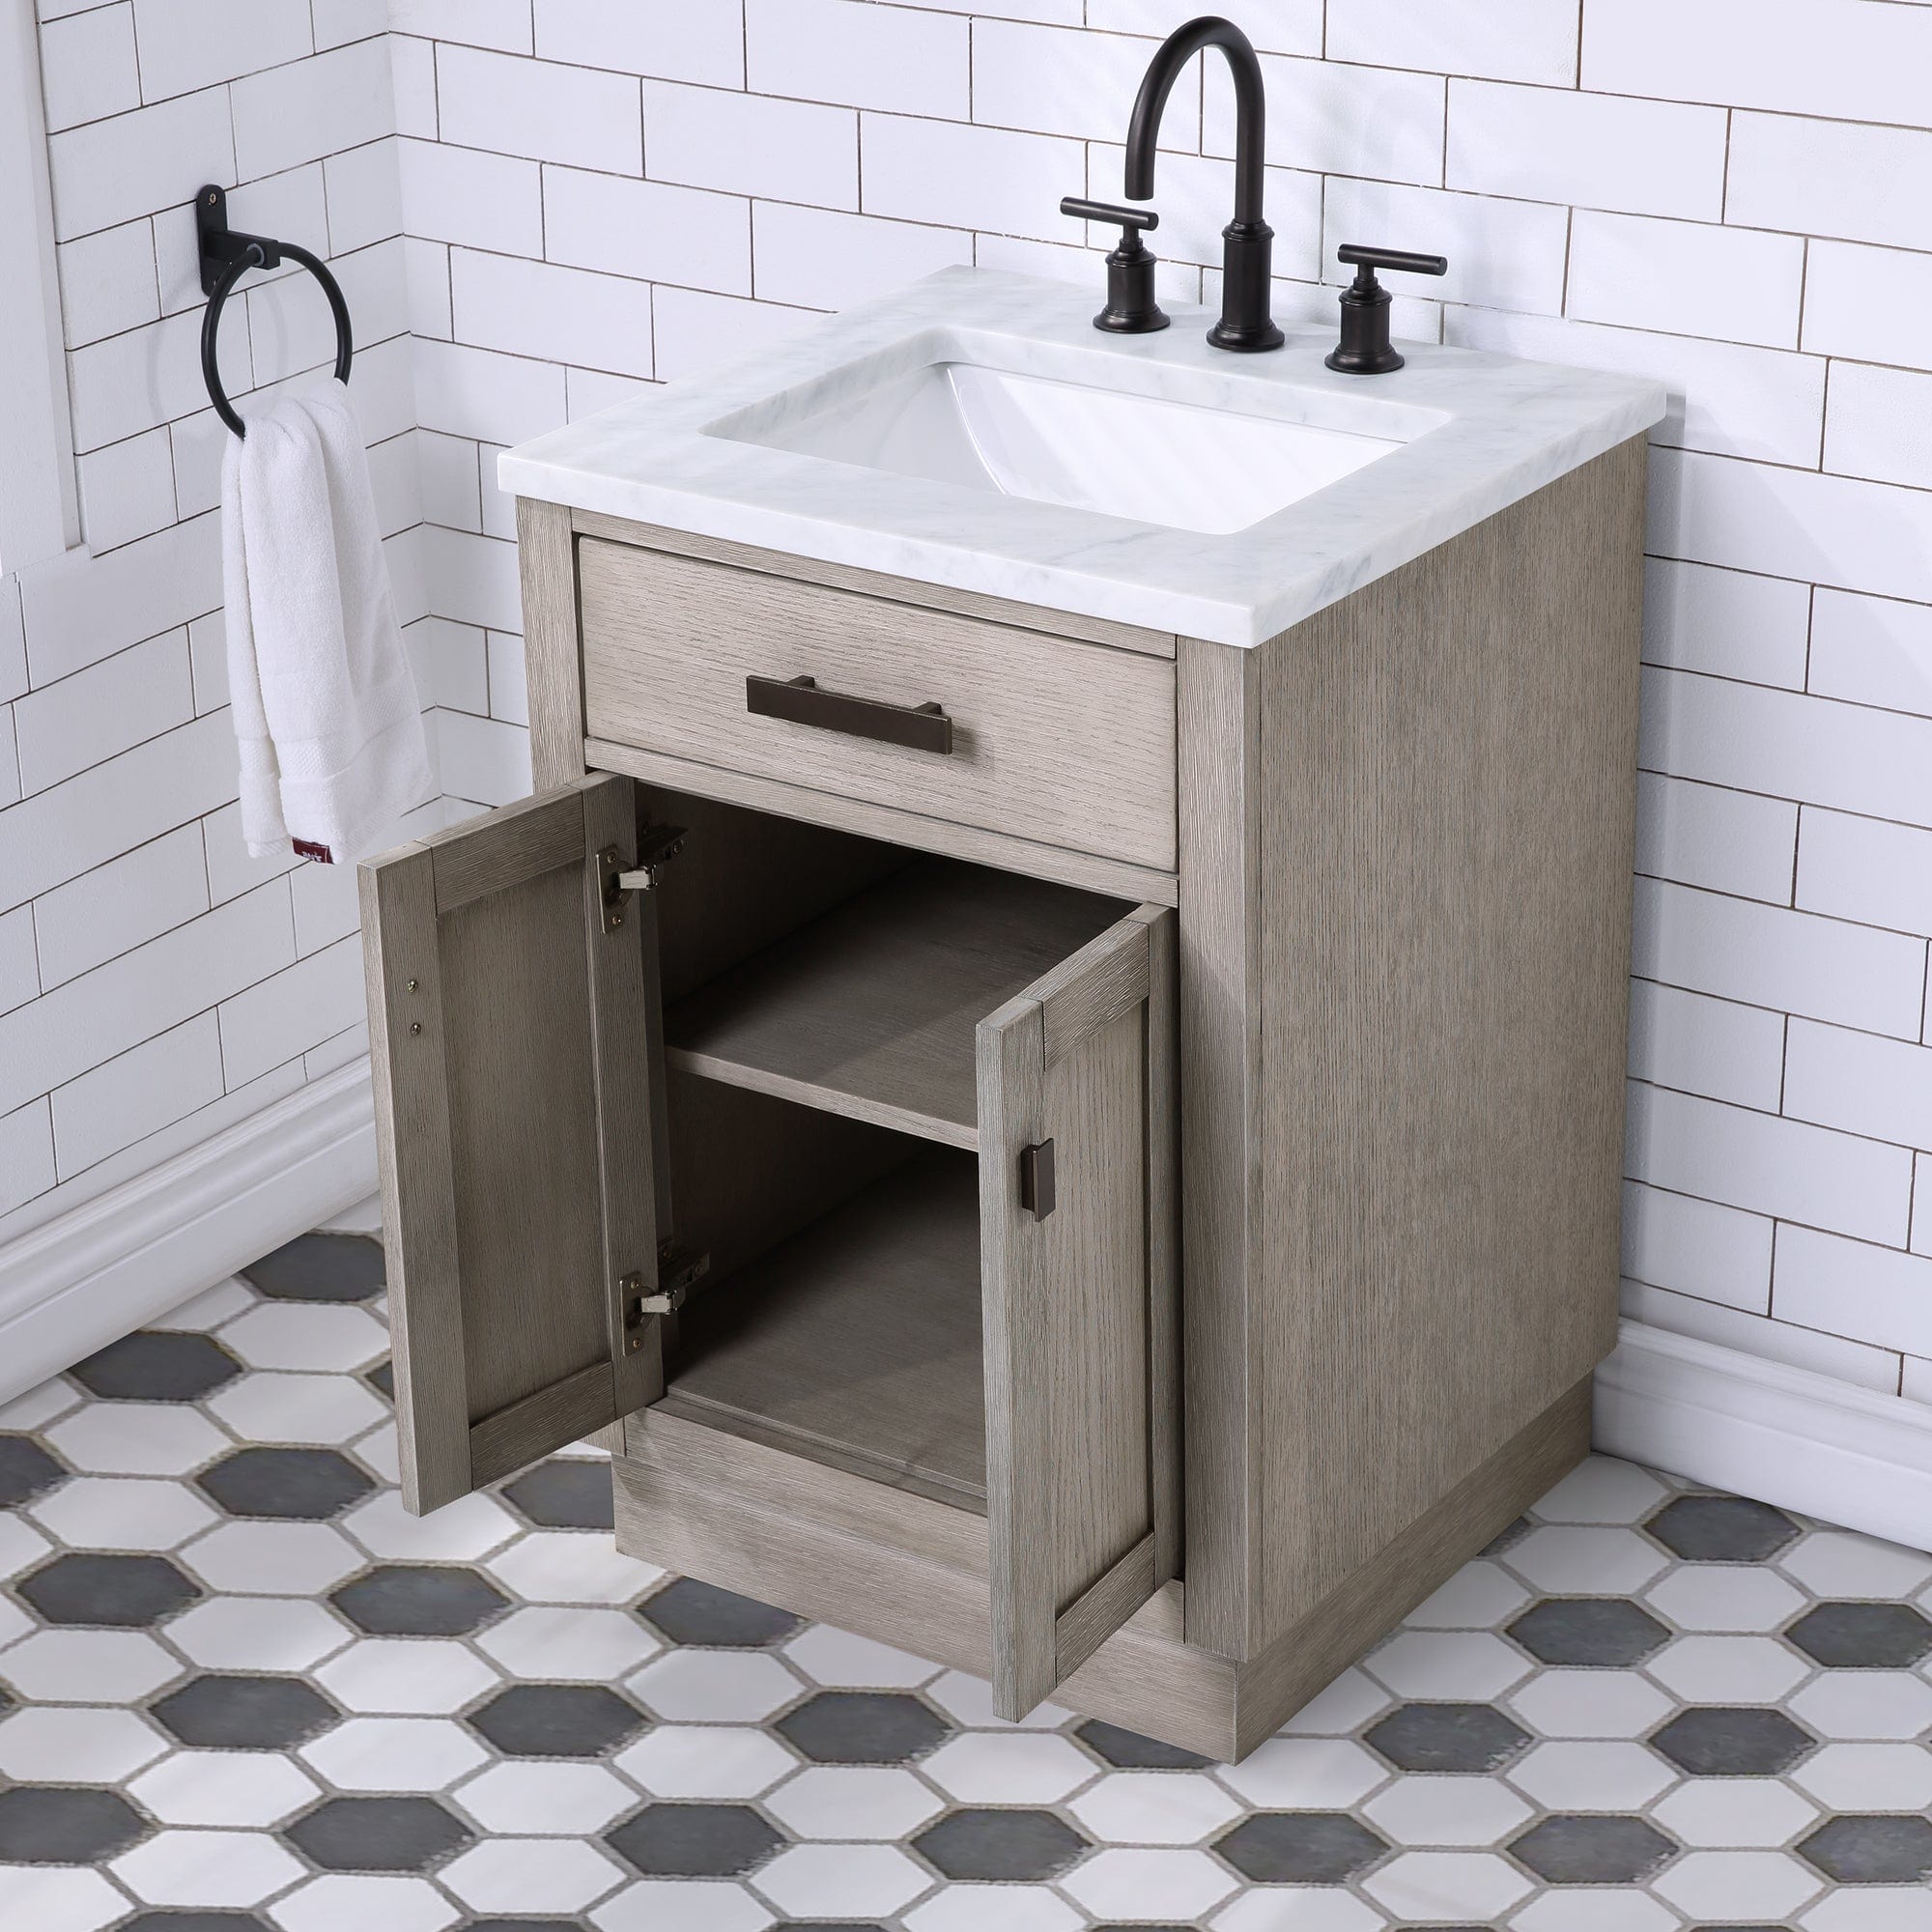 Chestnut 24 In. Single Sink Carrara White Marble Countertop Vanity In Grey Oak with Grooseneck Faucet - Molaix732030764576CH24CW03GK-000BL1403